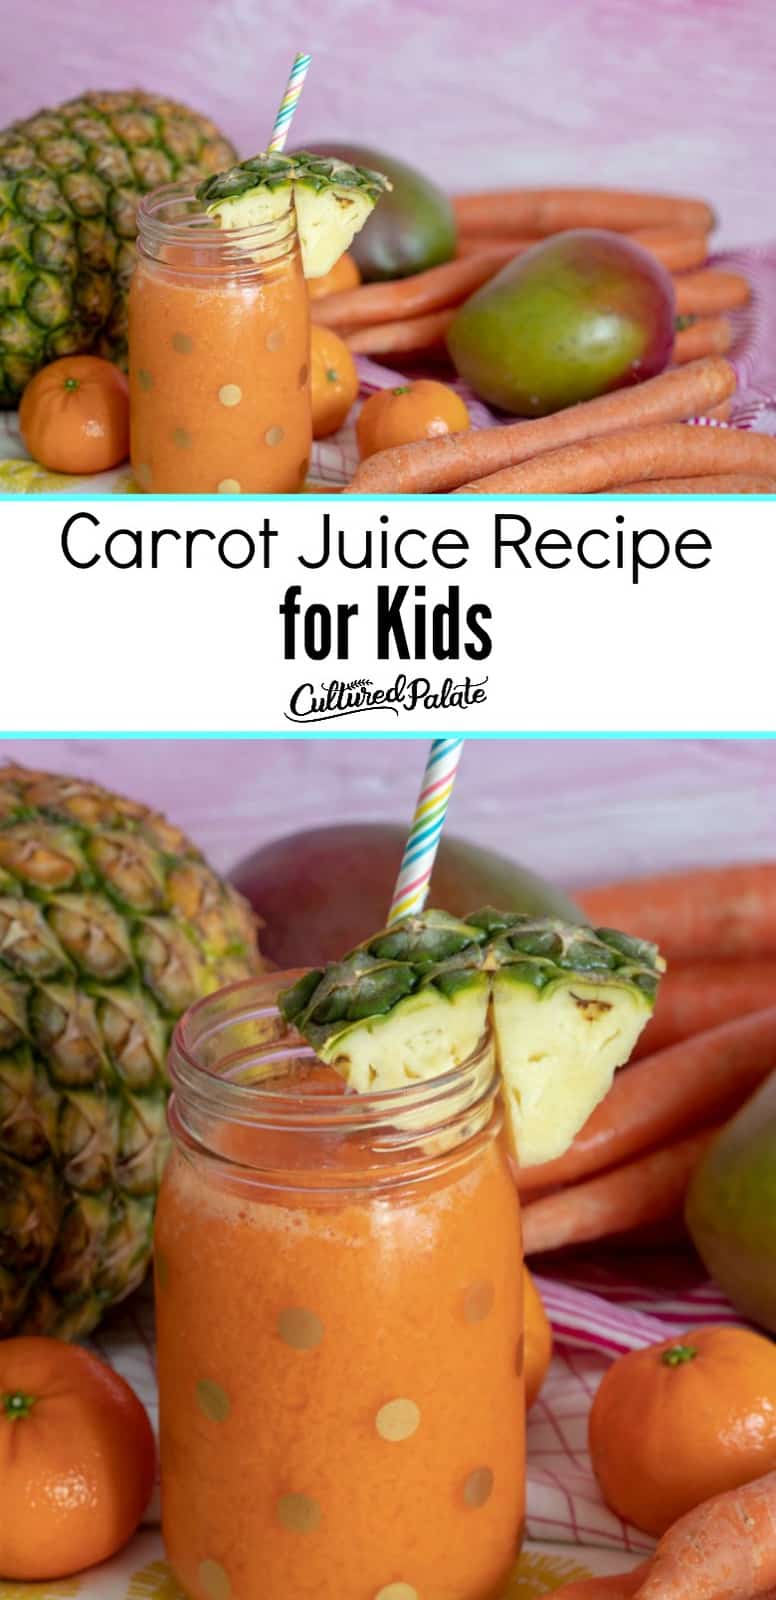 Carrot Juice Recipe for Kids shown in glass jar with straw and fruit with text overlay